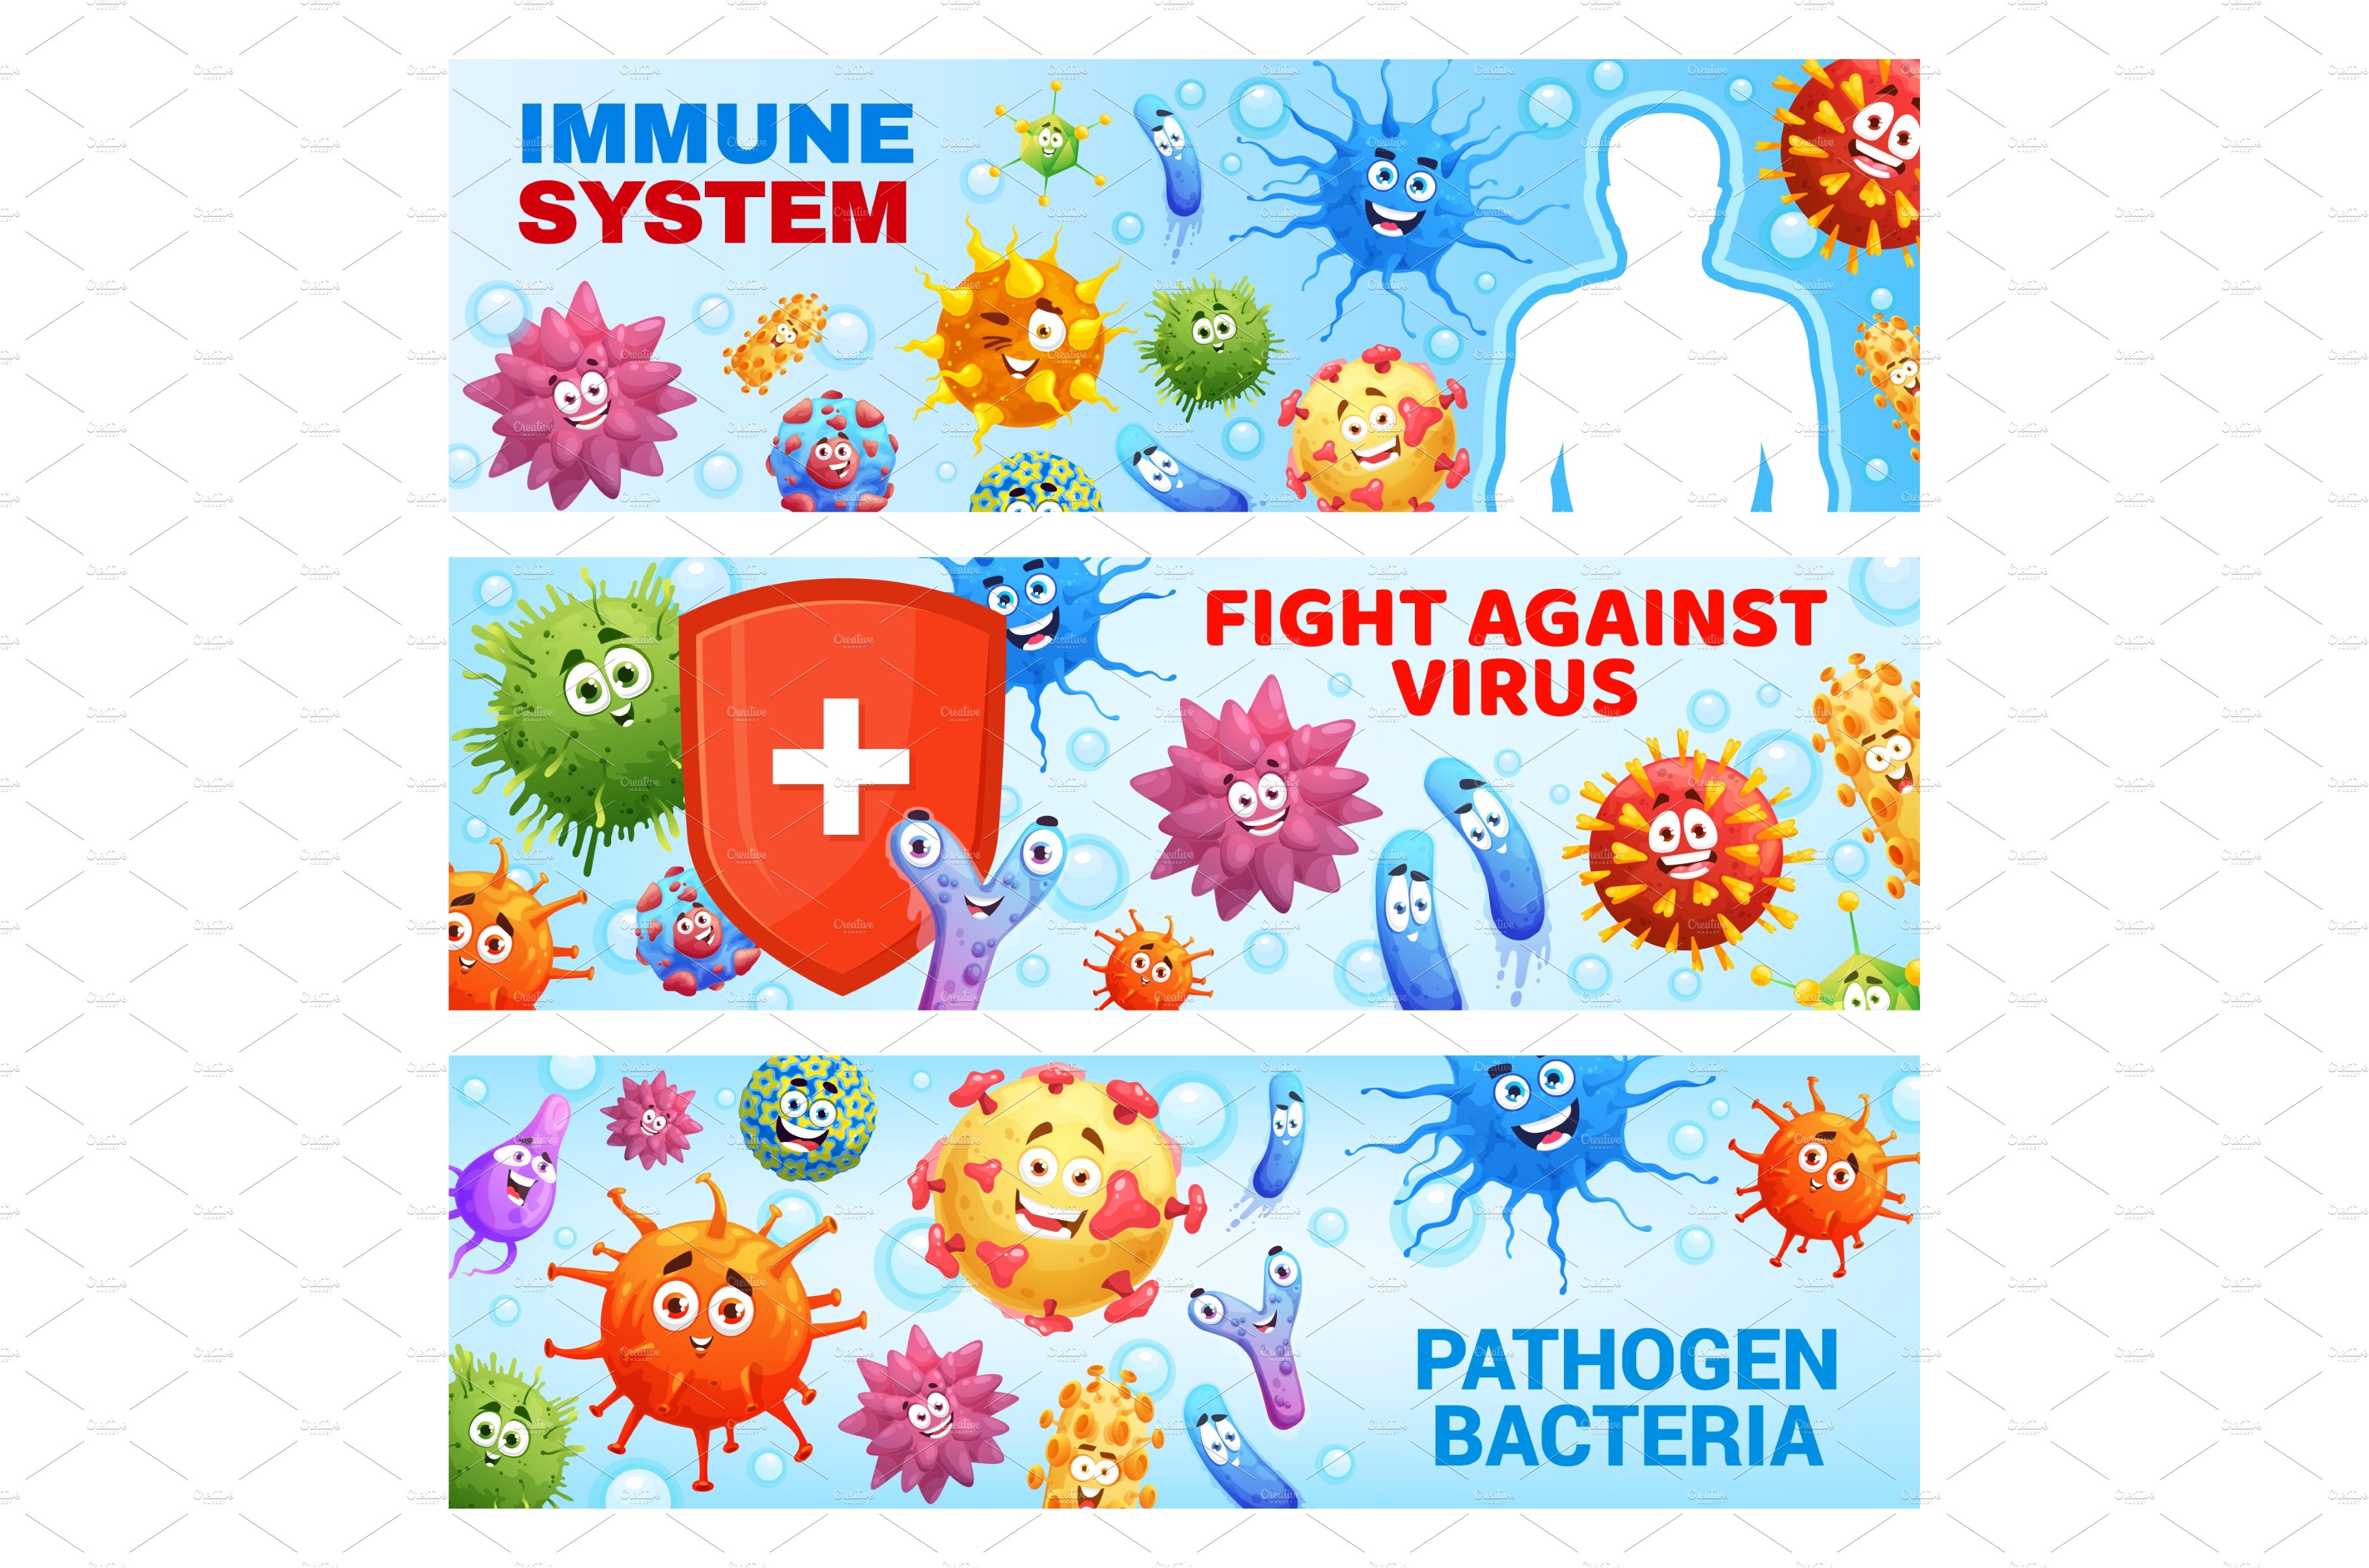 Virus protection, immune system cover image.